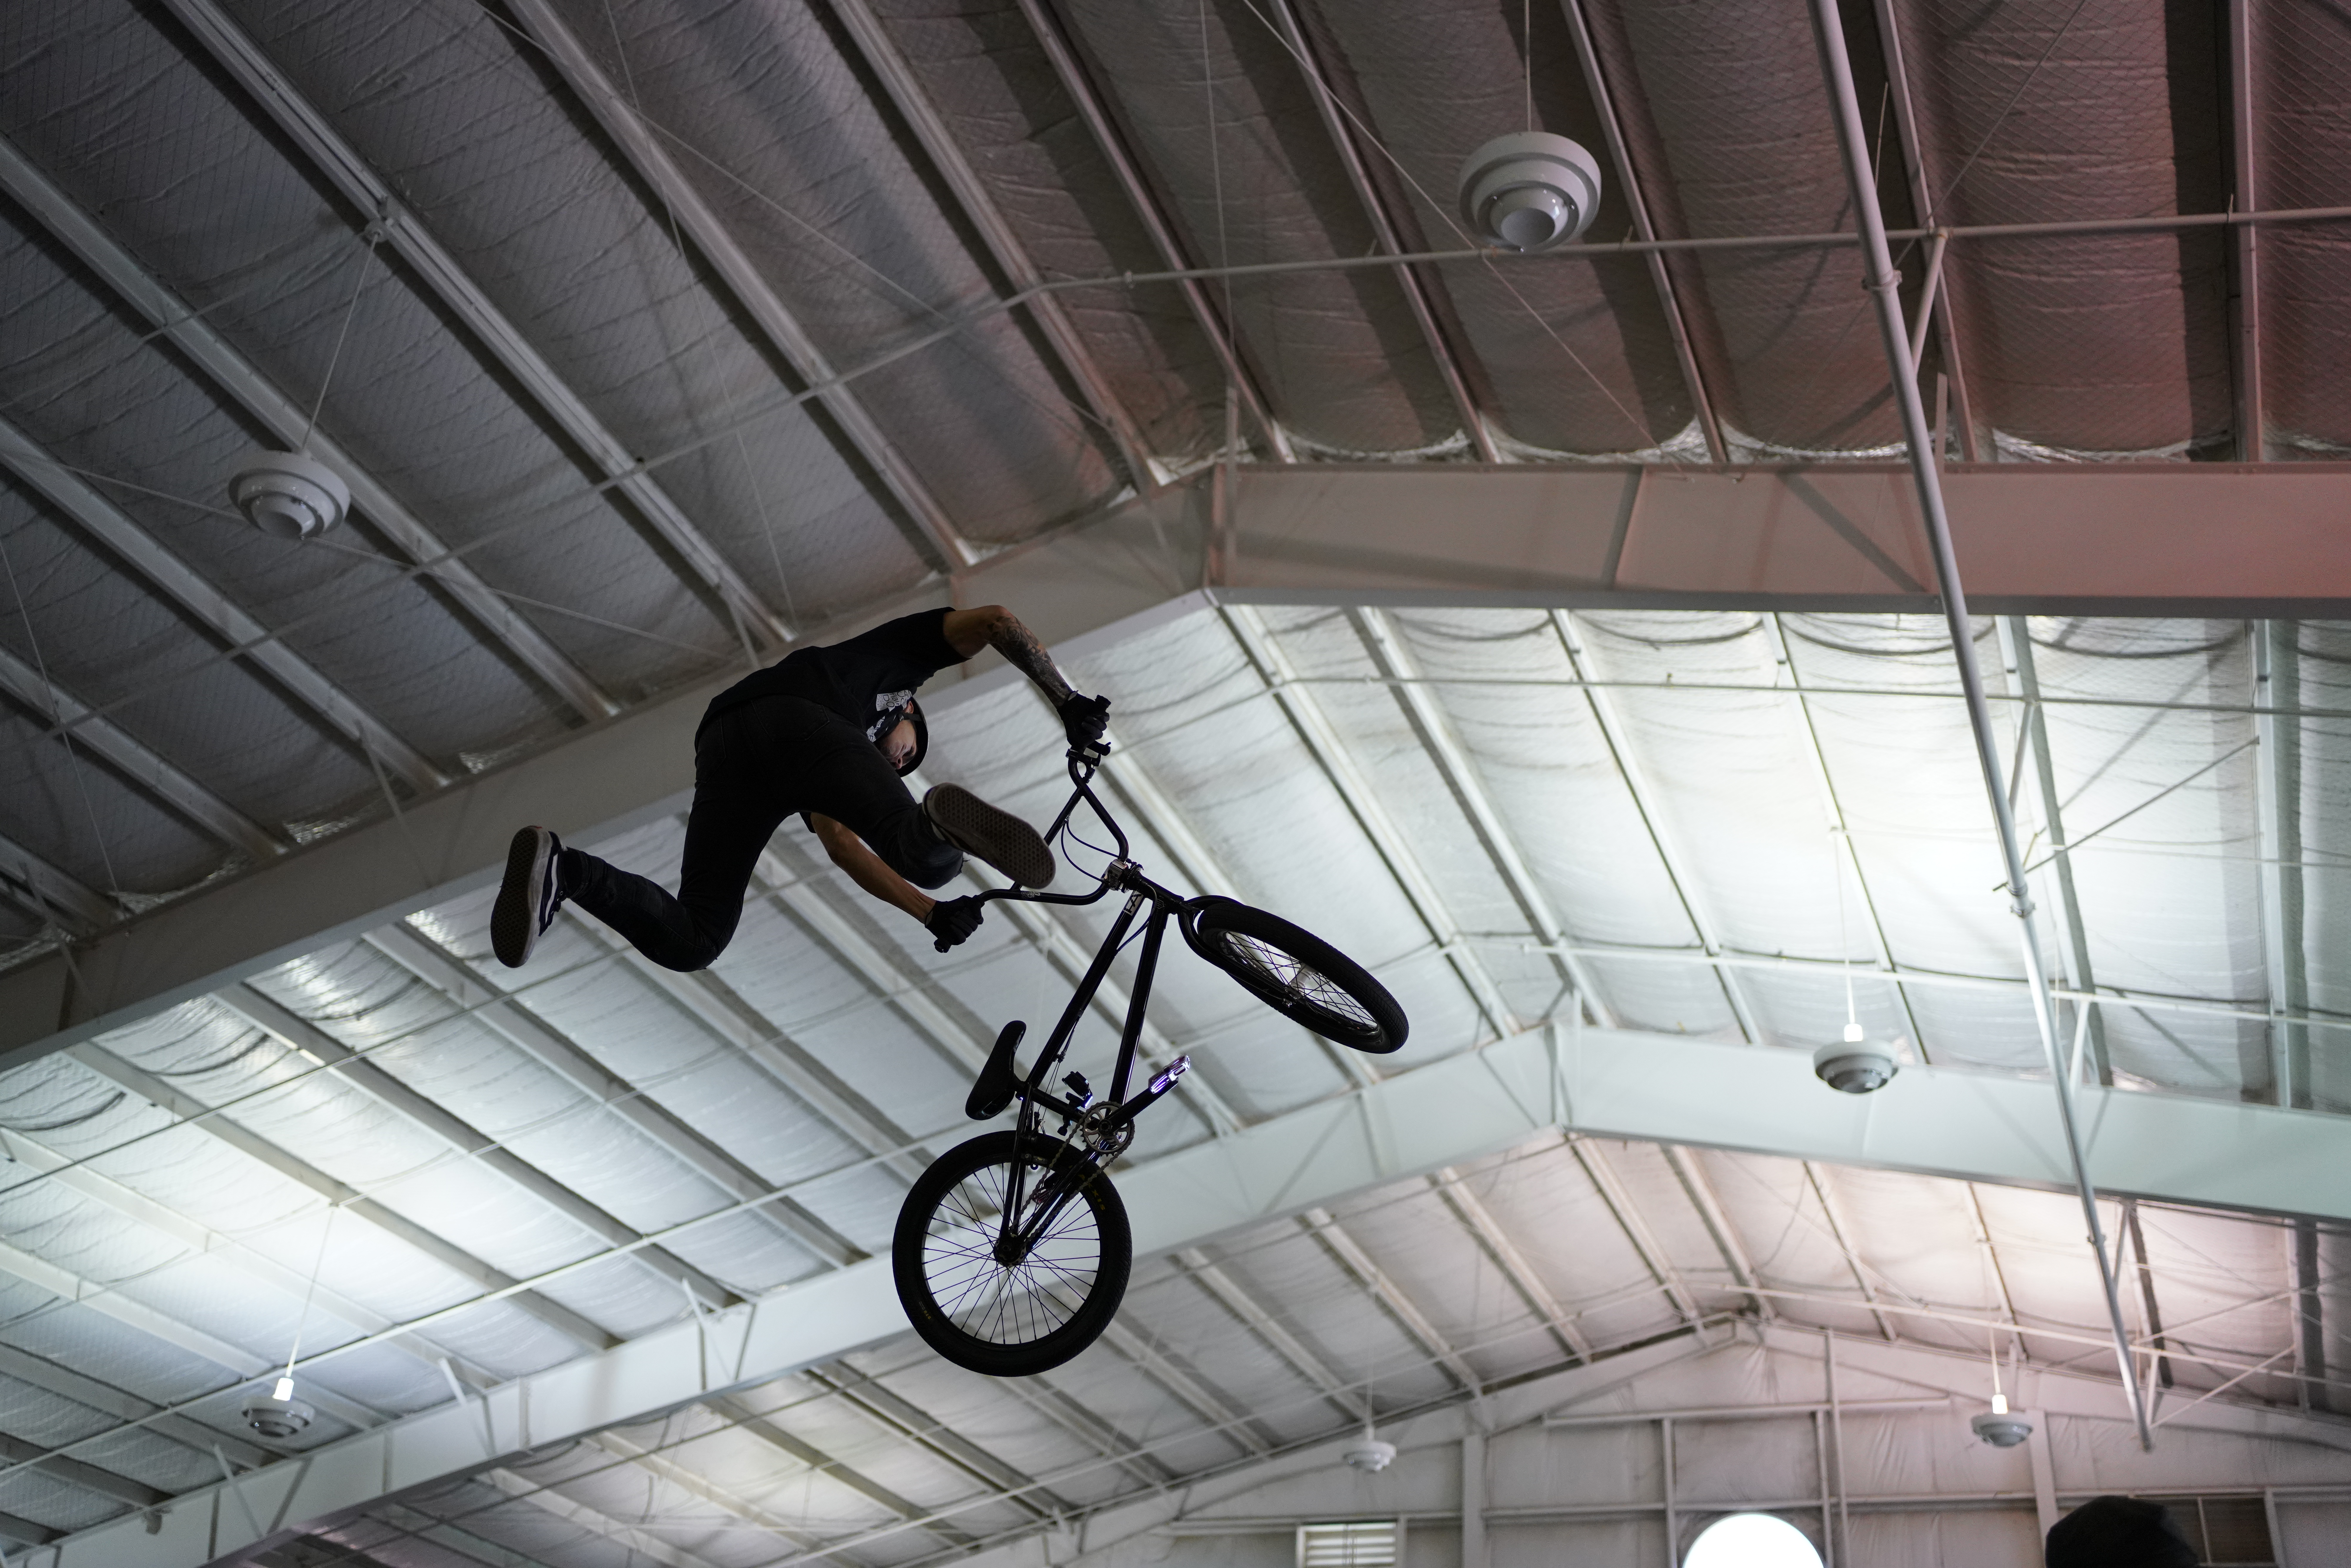 Free Agent rider, Seth Riley, pulling a down whip at Woodward.